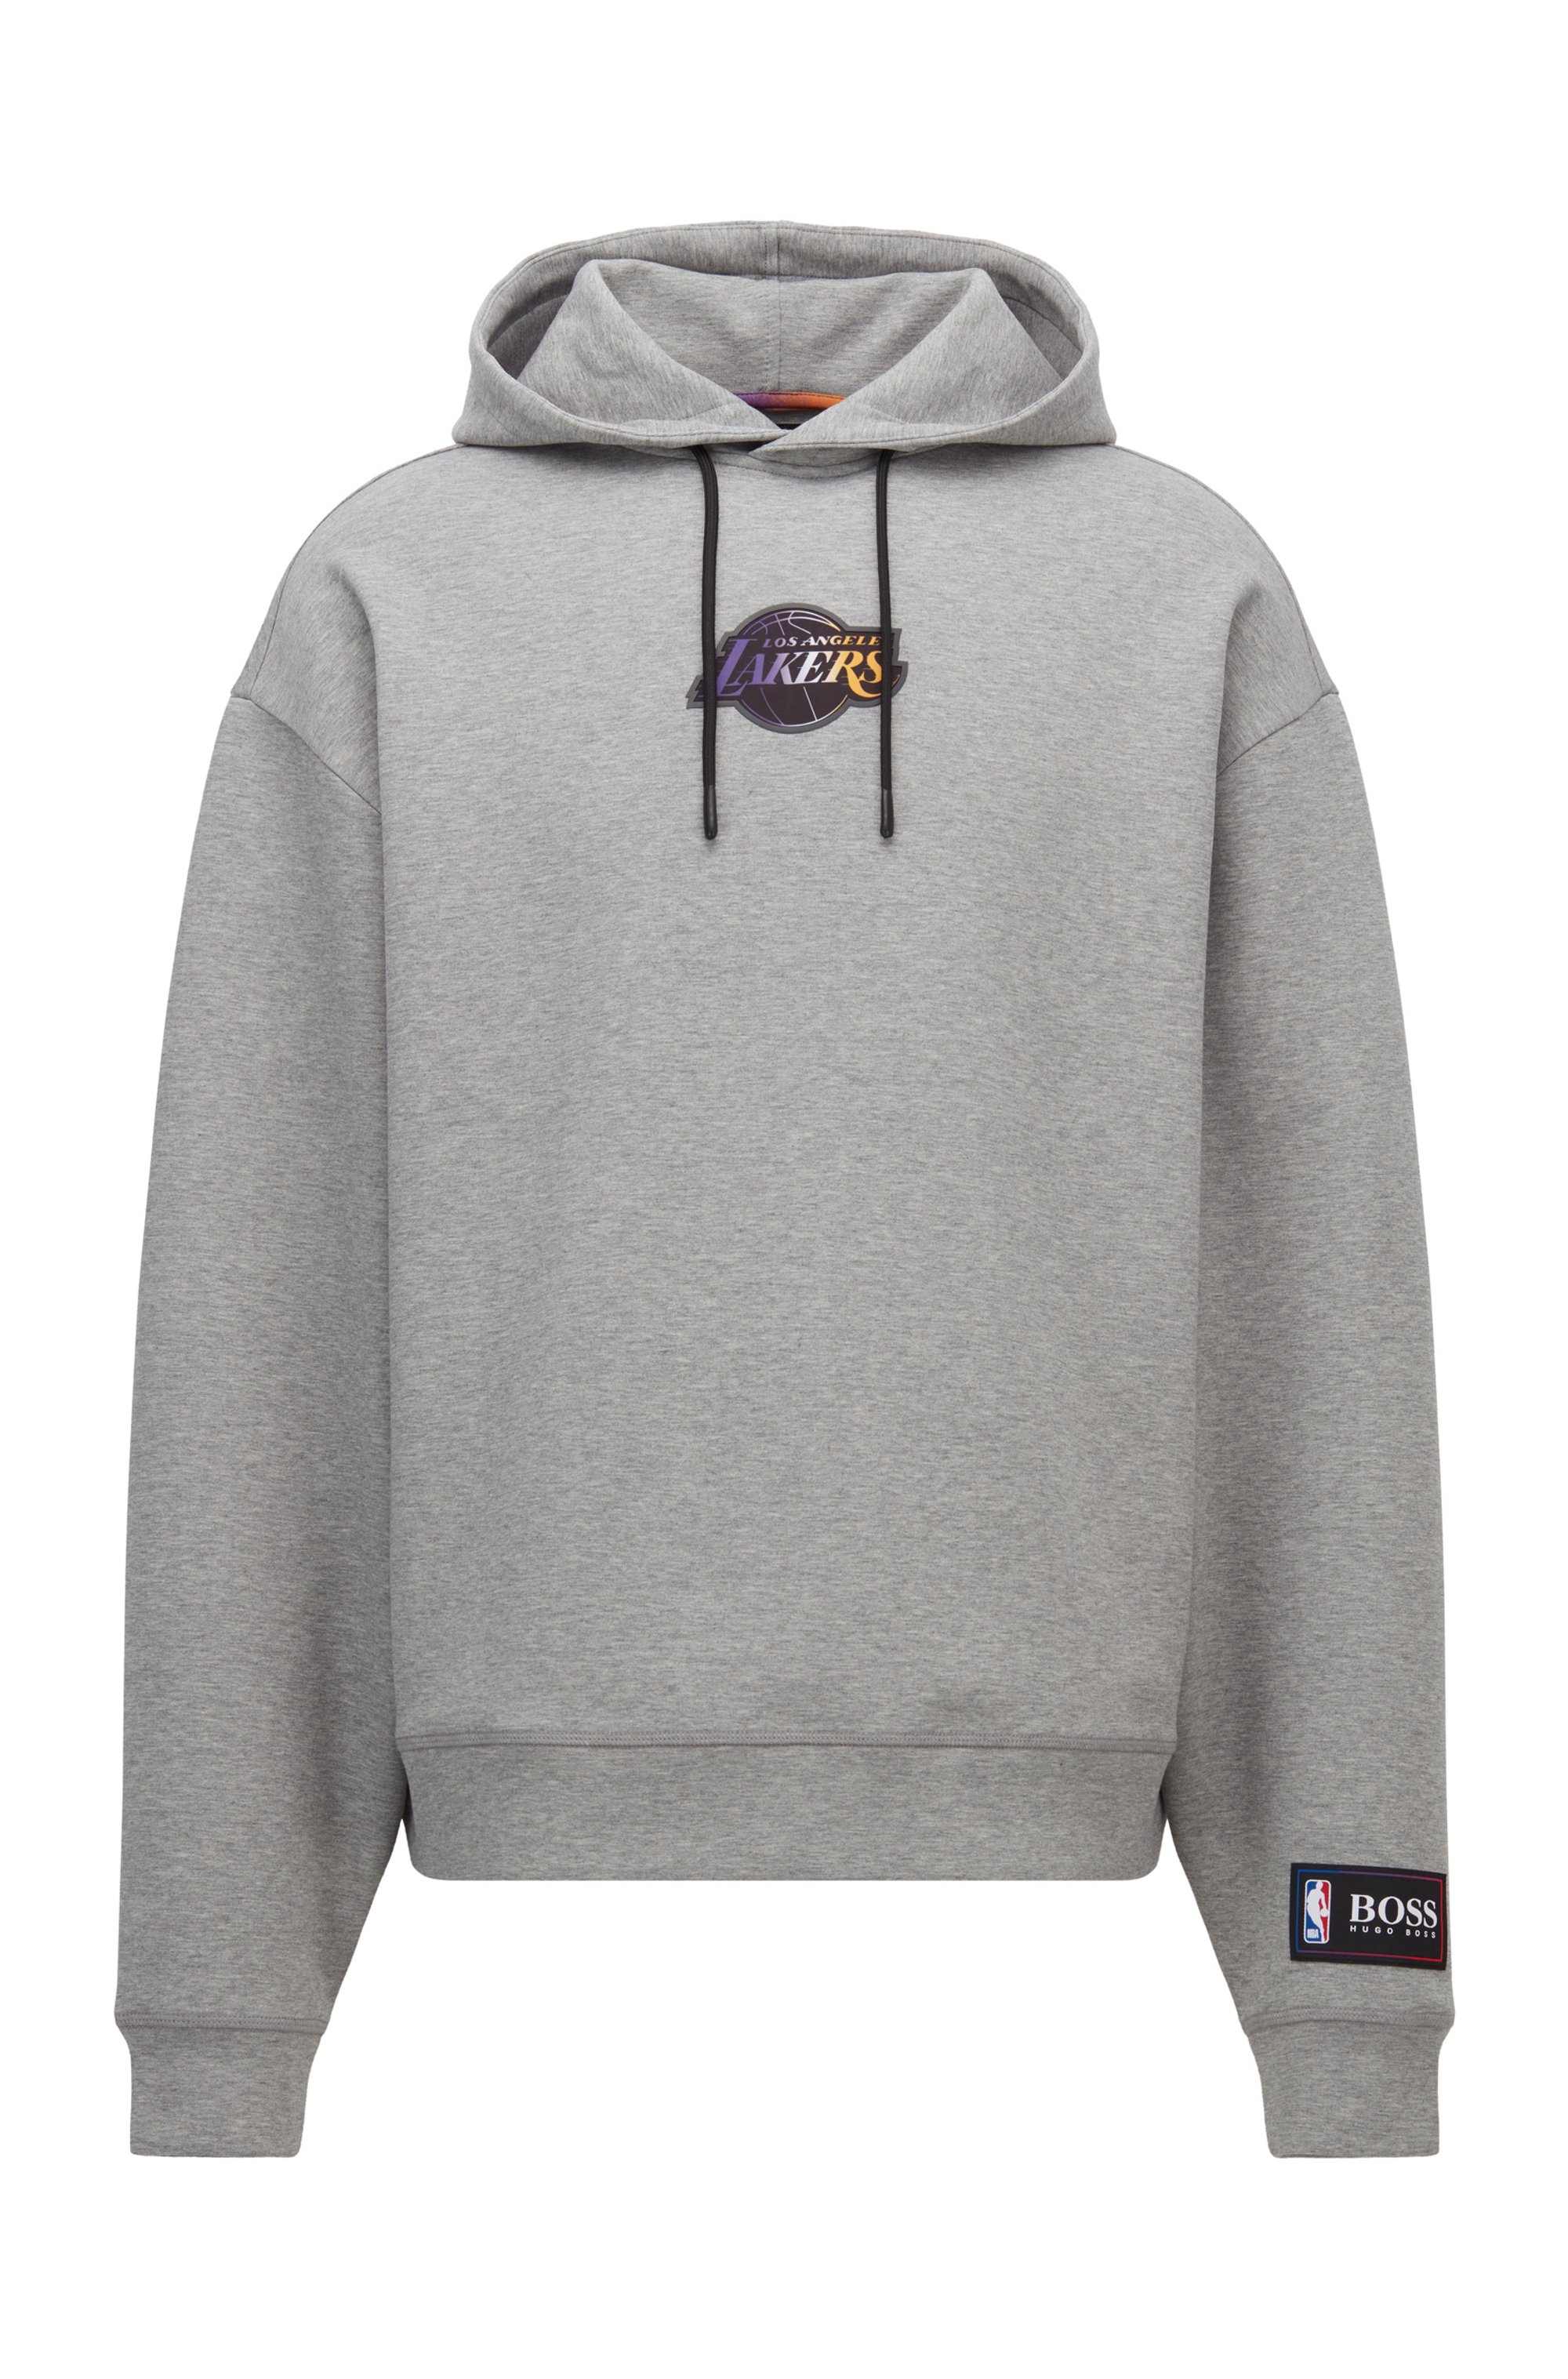 BOSS x NBA cotton-blend hoodie with coordinating logos, NBA Lakers